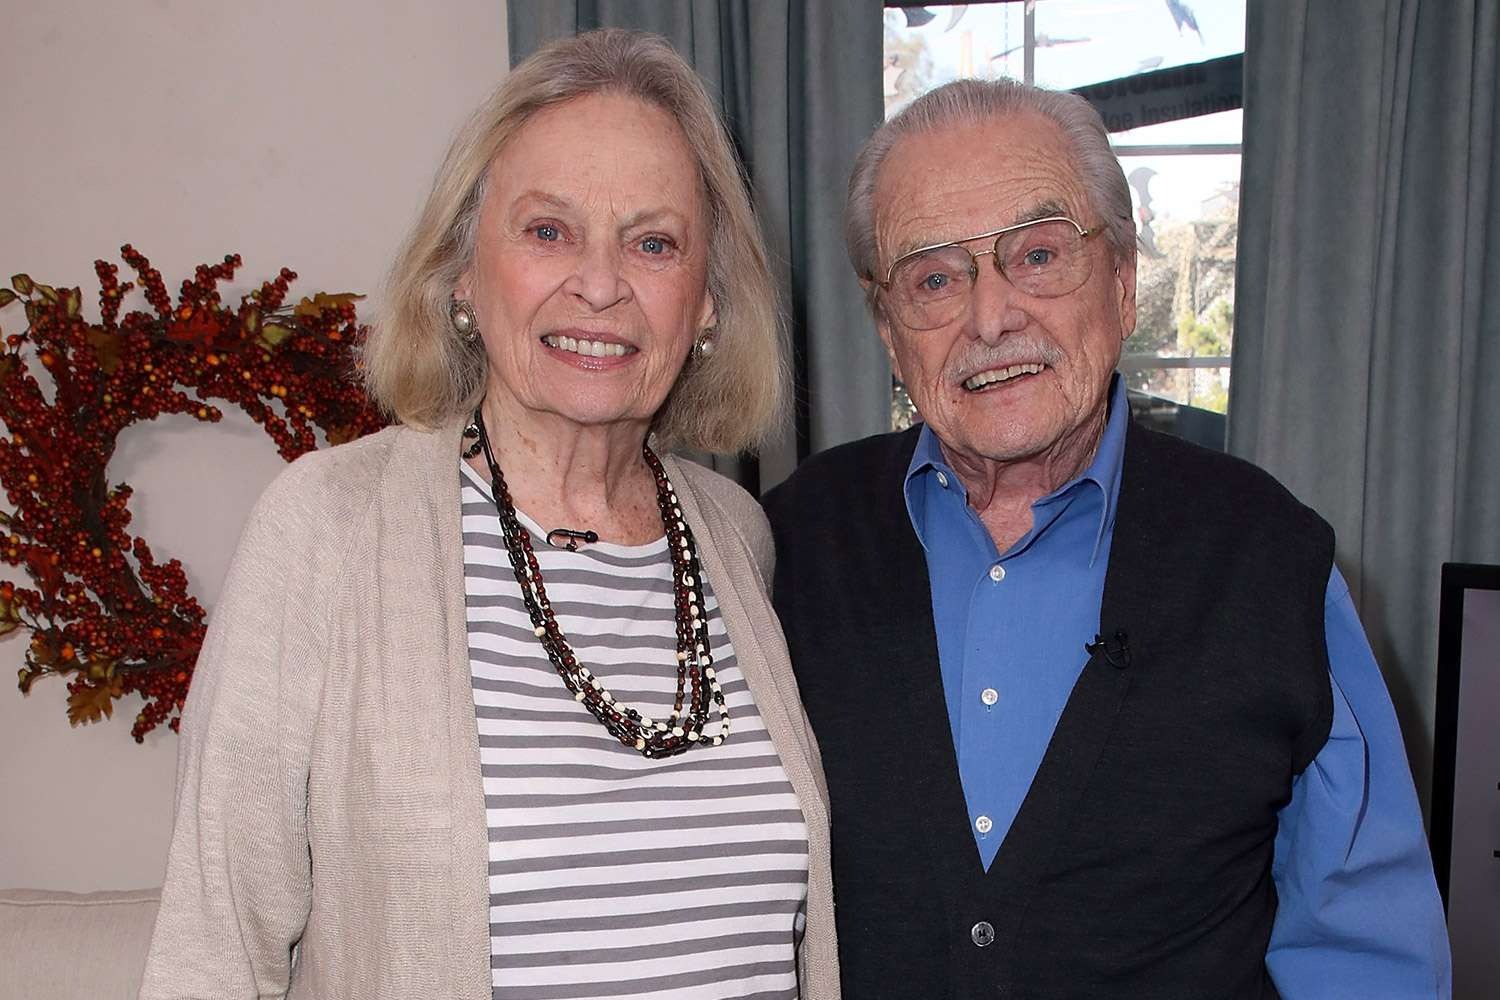 American actress Bonnie Bartlett has spoken out about her 72-year marriage to actor William Daniels. The 93-year-old actress revealed to Fox News Digital during a promotion for her new book, Middle of the Rainbow, that she and Daniels struggled as a couple after marrying in 1951. "I guess it was an open marriage at first, but it was really difficult. That did not go so well. And it was a time when people did such things. It was at a time in New York when there was a lot of s*x and a lot of people doing all kinds of things - it was extremely free." She went on to say that their "lack of commitment" in their marriage was "not healthy." "Any violation, any adulterous incident, there was a lot of grief associated with it." In 1951, Daniels and Bartlett married. On the same night in 1986, the pair made history by receiving Emmy nominations for their roles in the drama series St. Elsewhere. The Marriage of William Daniels and Bonnie Bartlett William Daniels and Bonnie Bartlett are currently residing in a home in southern California. In May 2022, the Boy Meets World actor admitted to Forbes that he "confidently" asked out Bartlett while the two were studying together at Northwestern University. Since then, they've been inseparable. Bonnie Bartlett, according to Fox News Digital, said in her new book that she "never felt bad" about their open marriage because she and William "never felt committed to faithfulness." Mr. William Daniels The Golden Girls actress had an affair with a "somewhat dull" actor that "lasted a few months" around 1959. When her husband's romance with a New York-based producer left her "devastated" in the 1970s, her views on open marriage shifted. Following that, Bartlett stated that she "could no longer accept any form of open marriage." Bonnie Bartlett and William Daniels worked "day by day" to repair their broken marriage. "It was a very unpleasant experience for both of us. But we had to go through it because we had never done it before." According to Bartlett, as they grew up and matured together, the two were able to repair their friendship. "It was something we had to go through because we hadn't done it before. We first met when I was 18 years old. My first love was Bill... We simply had to go through it all, but we still deeply loved each other and always have." In addition, she stated: "[We] have always been there for one another. That's what matters: being there for the individual and assisting [them] in their relationship, respecting them and what they're doing, and being there for them... [You must be] on the opposite side of the street." Mr. William Daniels A Look Into William Daniels and Bonnie Bartlett ReltionshipA Look Into William Daniels and Bonnie Bartlett Reltionship